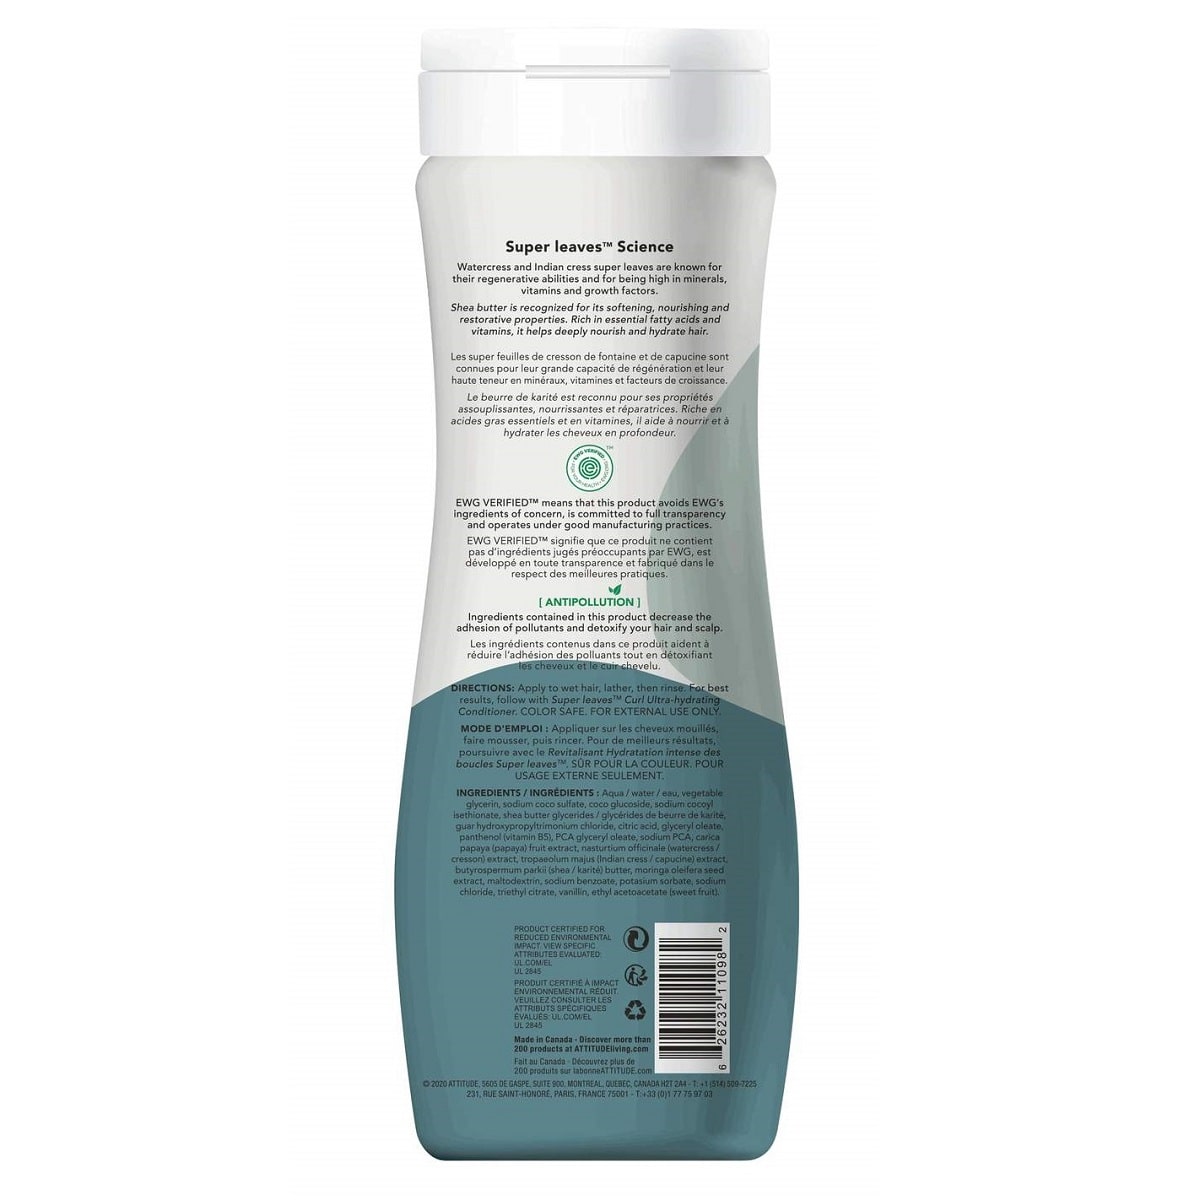 Description, ingredients, directions, and uses for ATTITUDE Super Leaves Curl Ultra-Hydrating Shampoo with Shea Butter (473 mL)